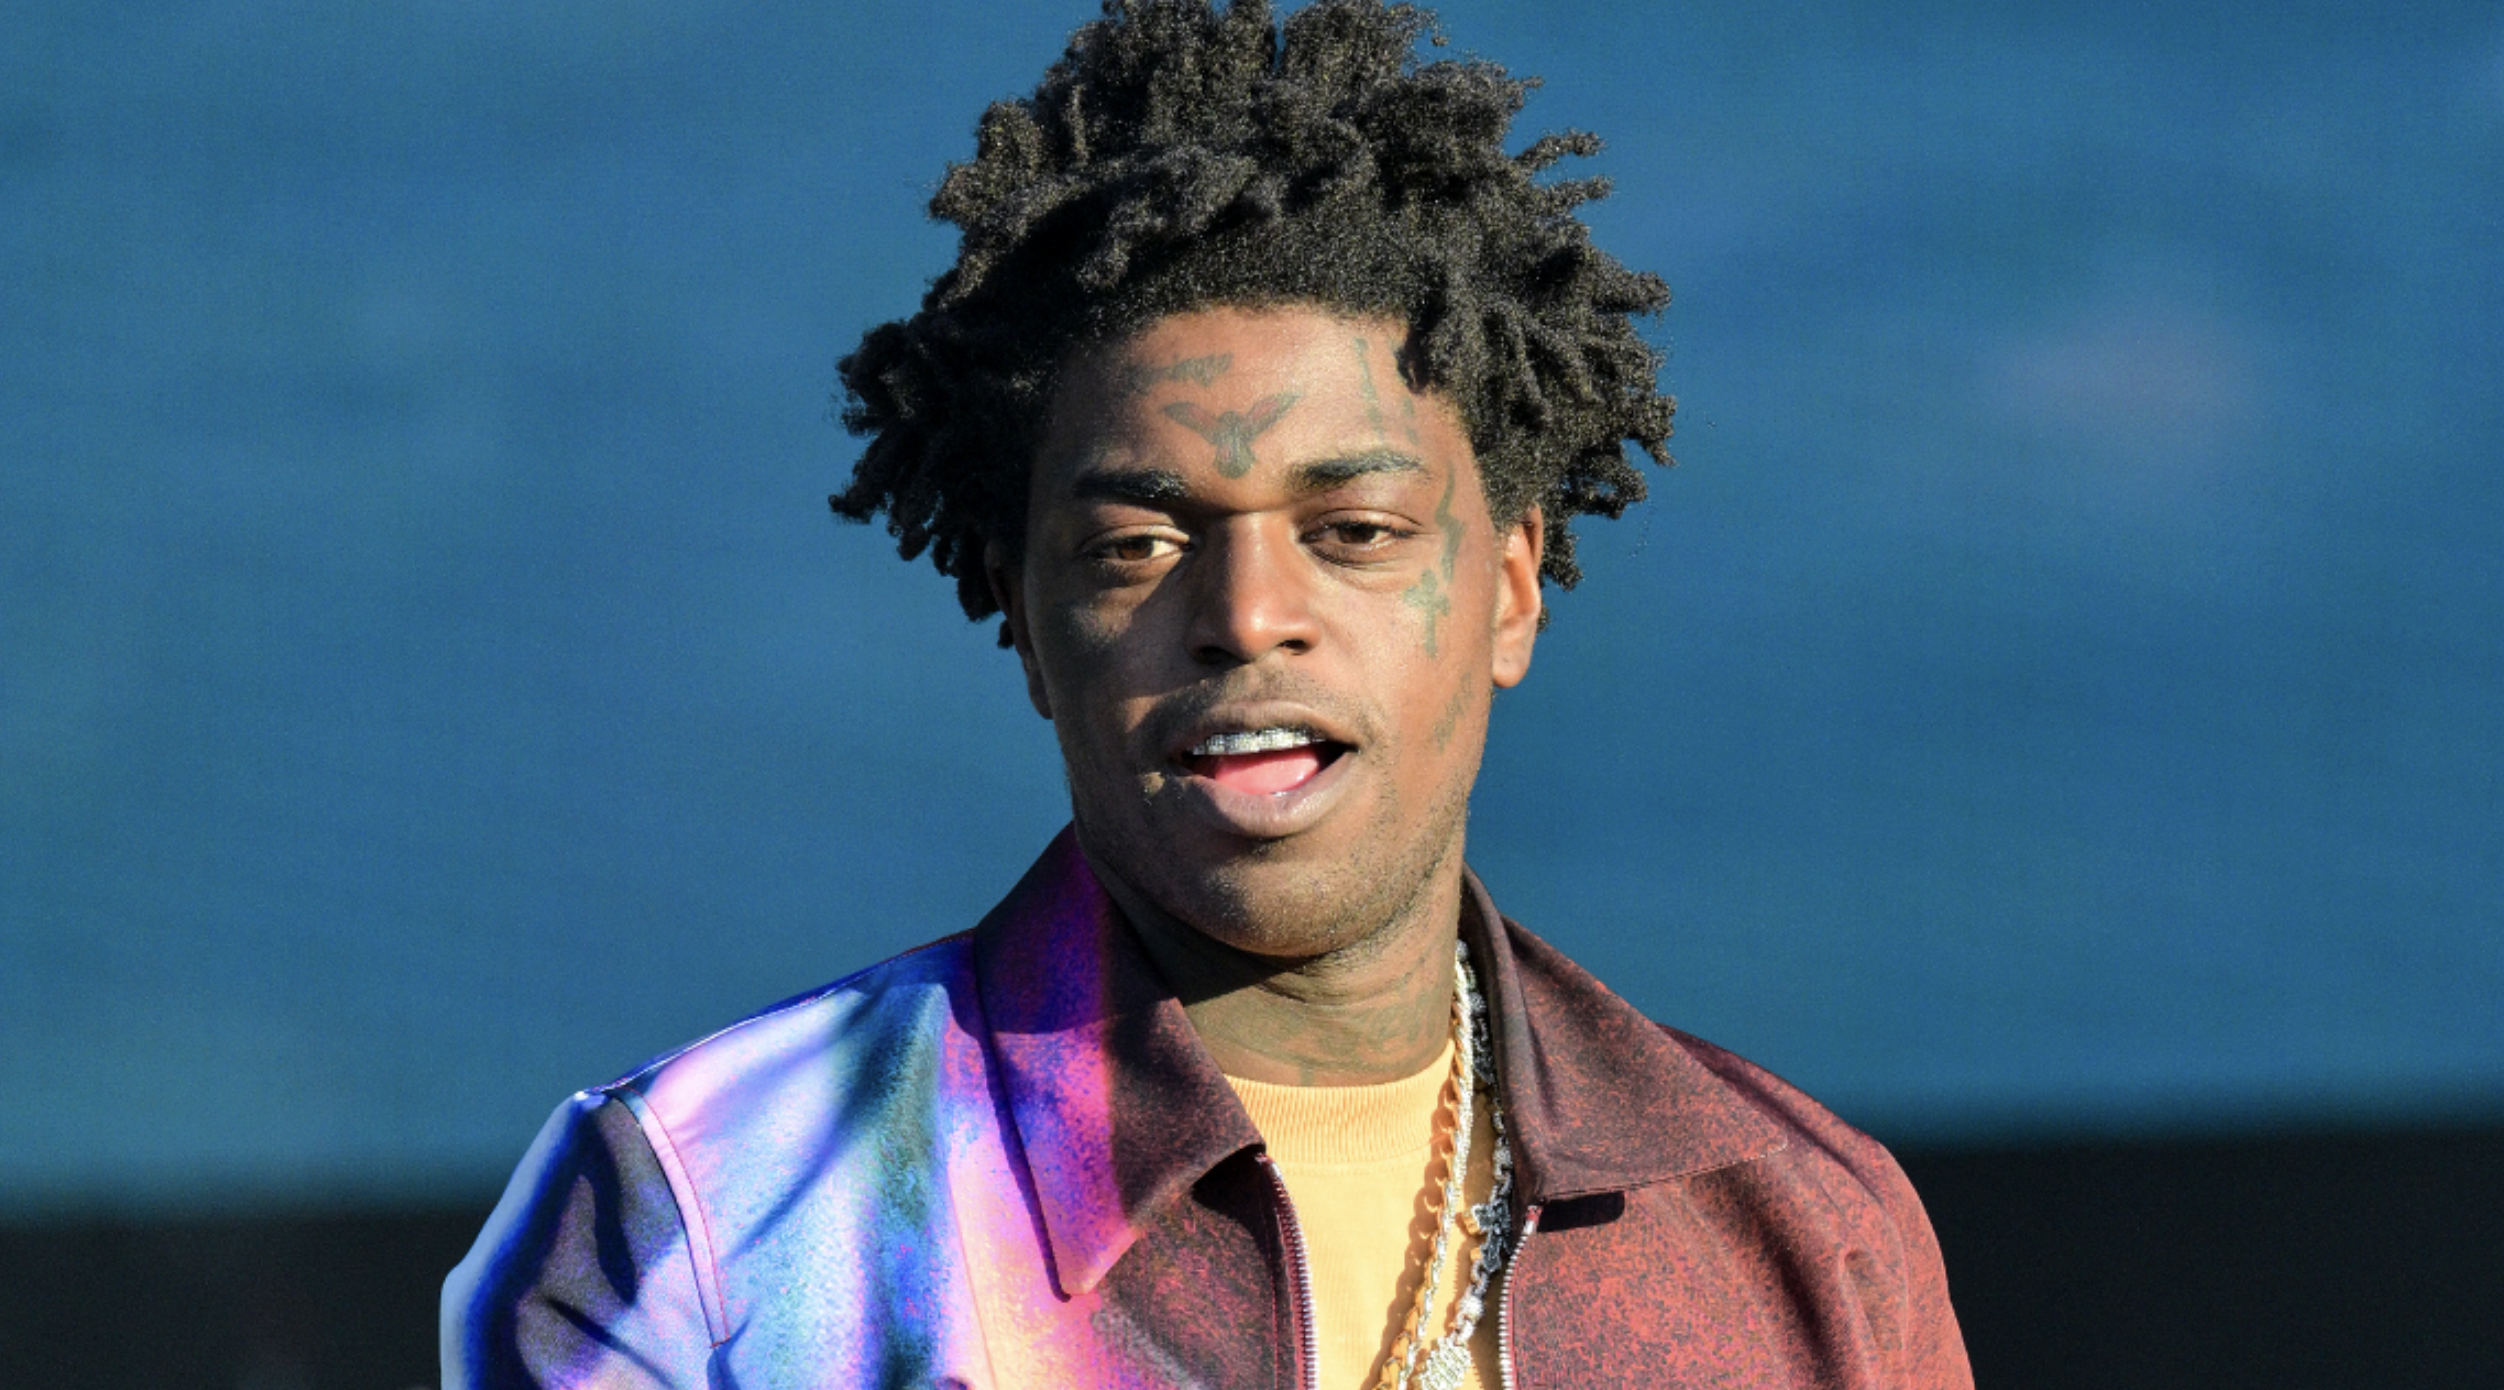 Not In The Clear! Kodak Black's Remains In Prison Despite Drug Possession Charge Being Dropped